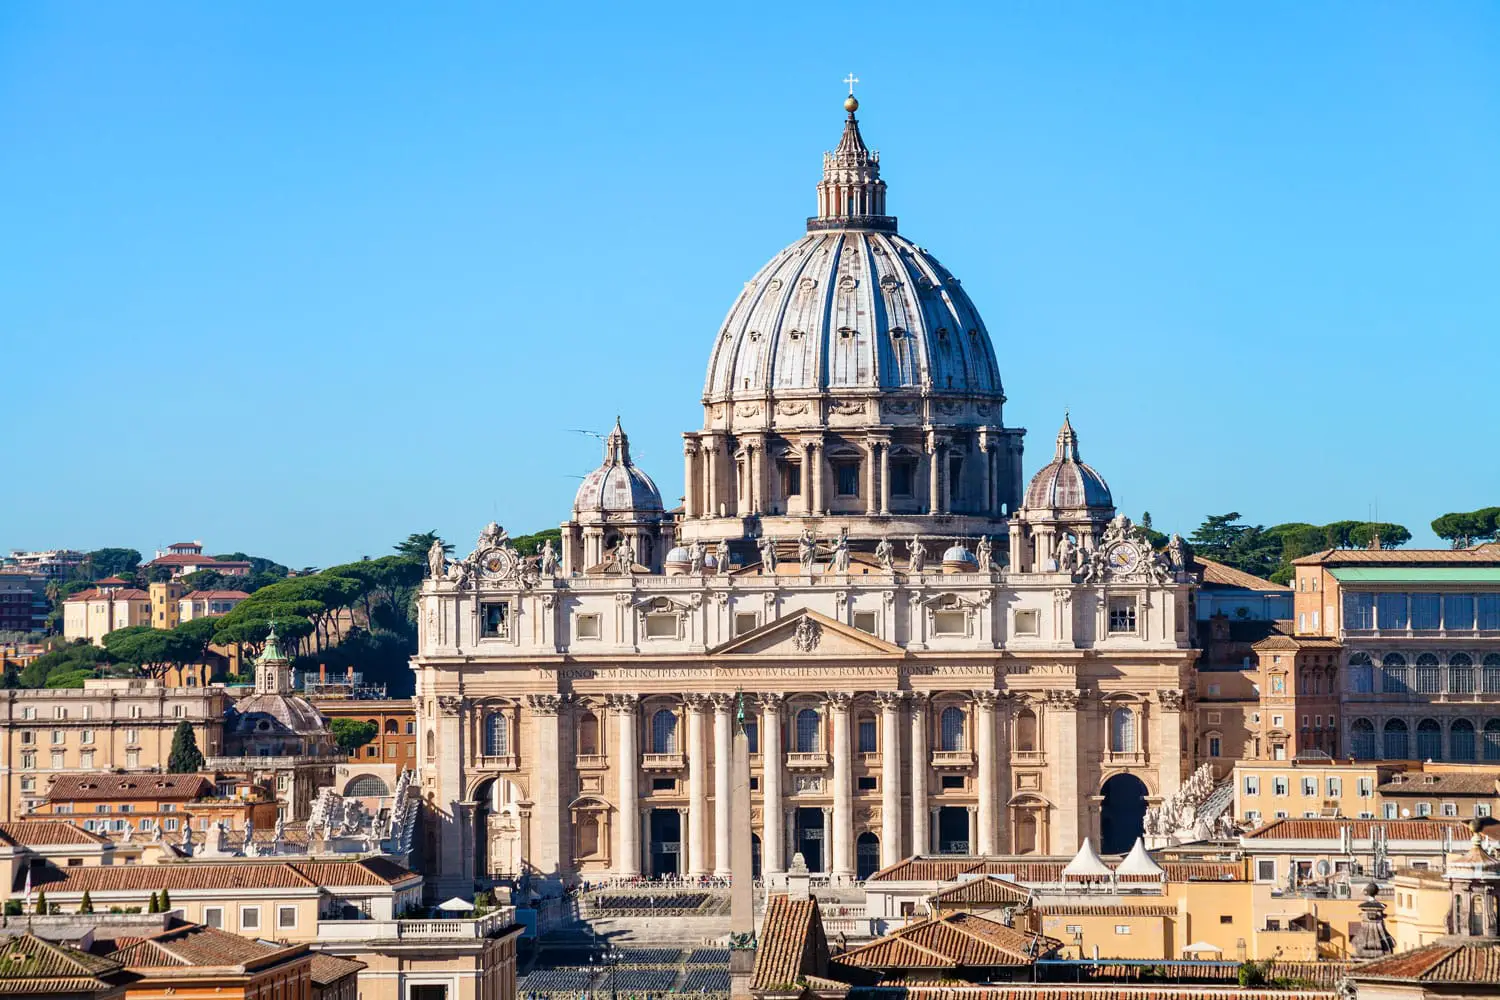 View of the St Peters Basilica in Vatican City from the Castle of Holy Angel